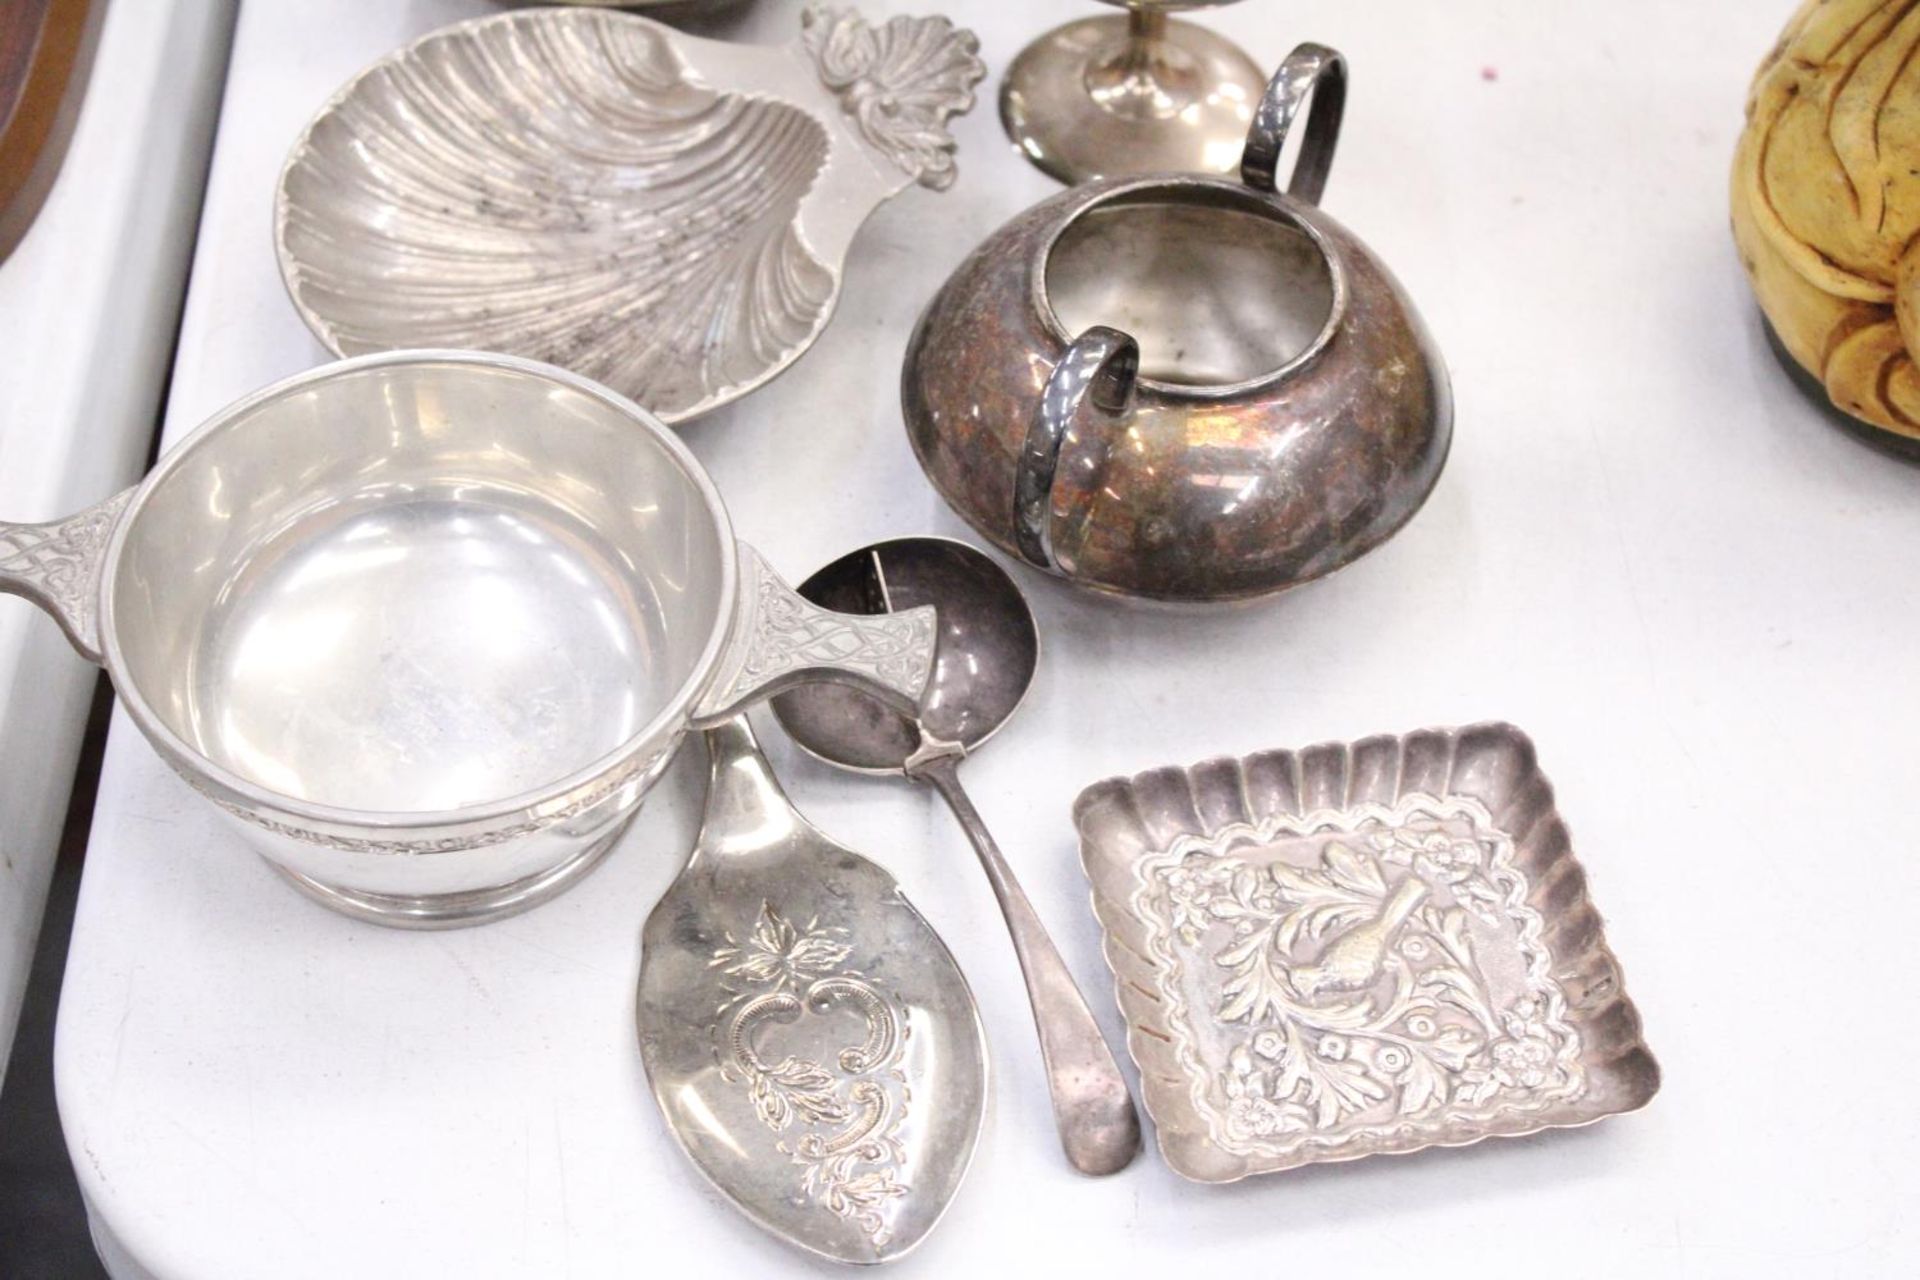 A LARGE QUANTITY OF SILVER PLATED ITEMS TO INCLUDE CANDLESTICKS, A KETTLE, A TANKARD, JUGS, BOWLS, - Bild 2 aus 6